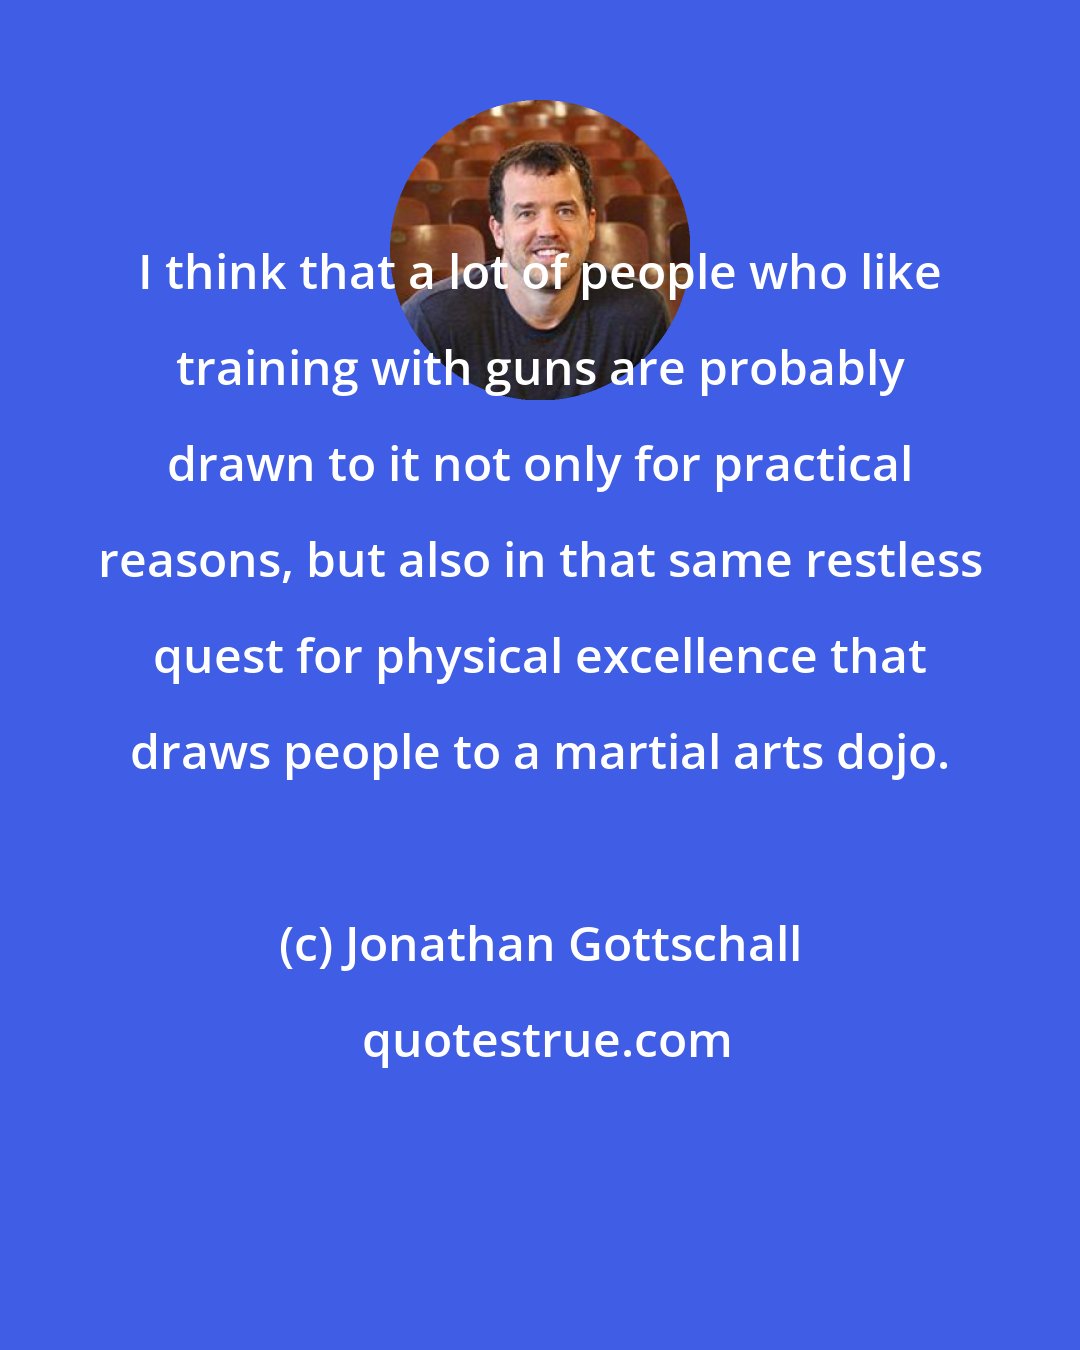 Jonathan Gottschall: I think that a lot of people who like training with guns are probably drawn to it not only for practical reasons, but also in that same restless quest for physical excellence that draws people to a martial arts dojo.